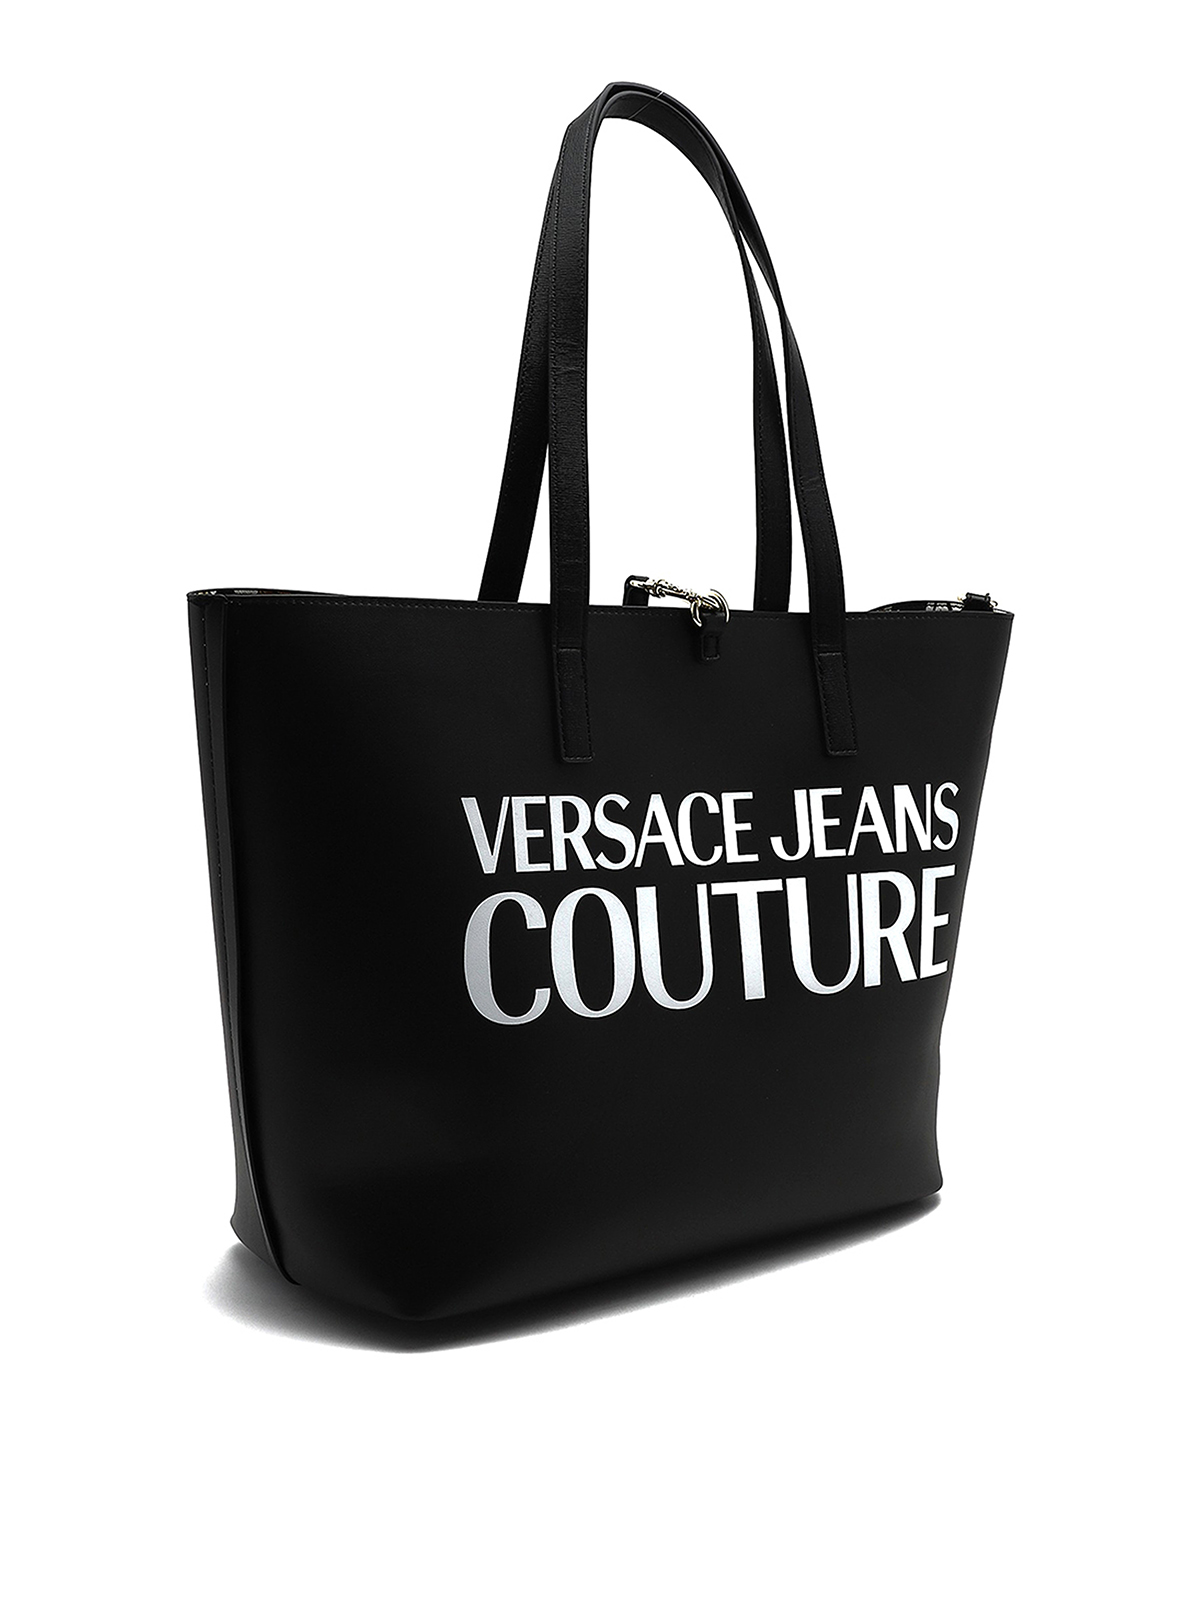 VERSACE JEANS COUTURE トートバッグ ブラック ホワイト